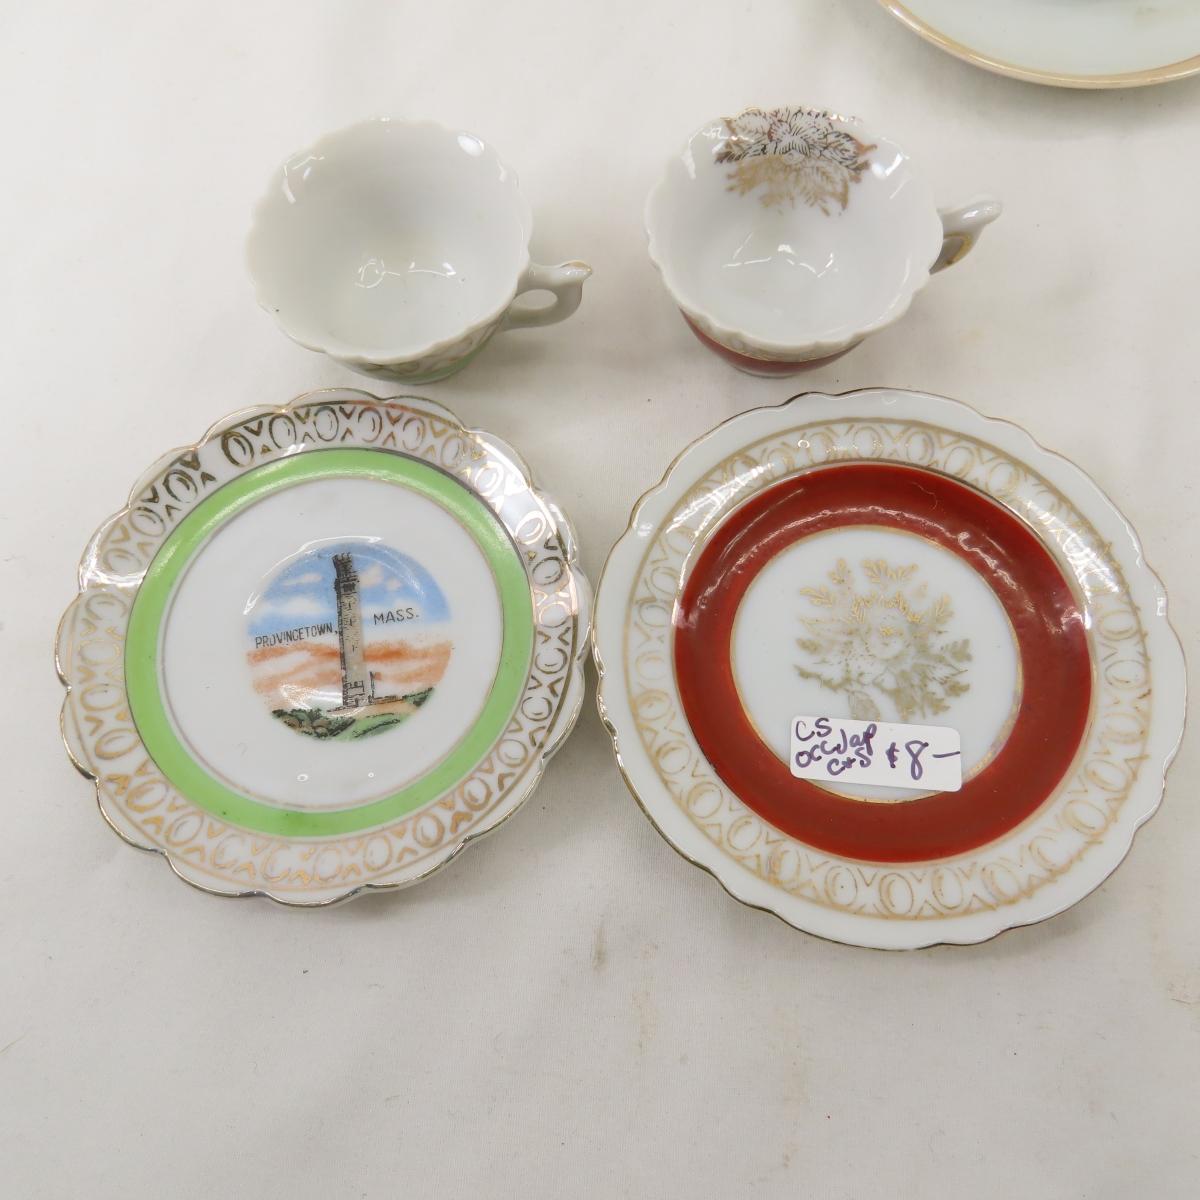 Antique demitasse cups, tea cups and saucers